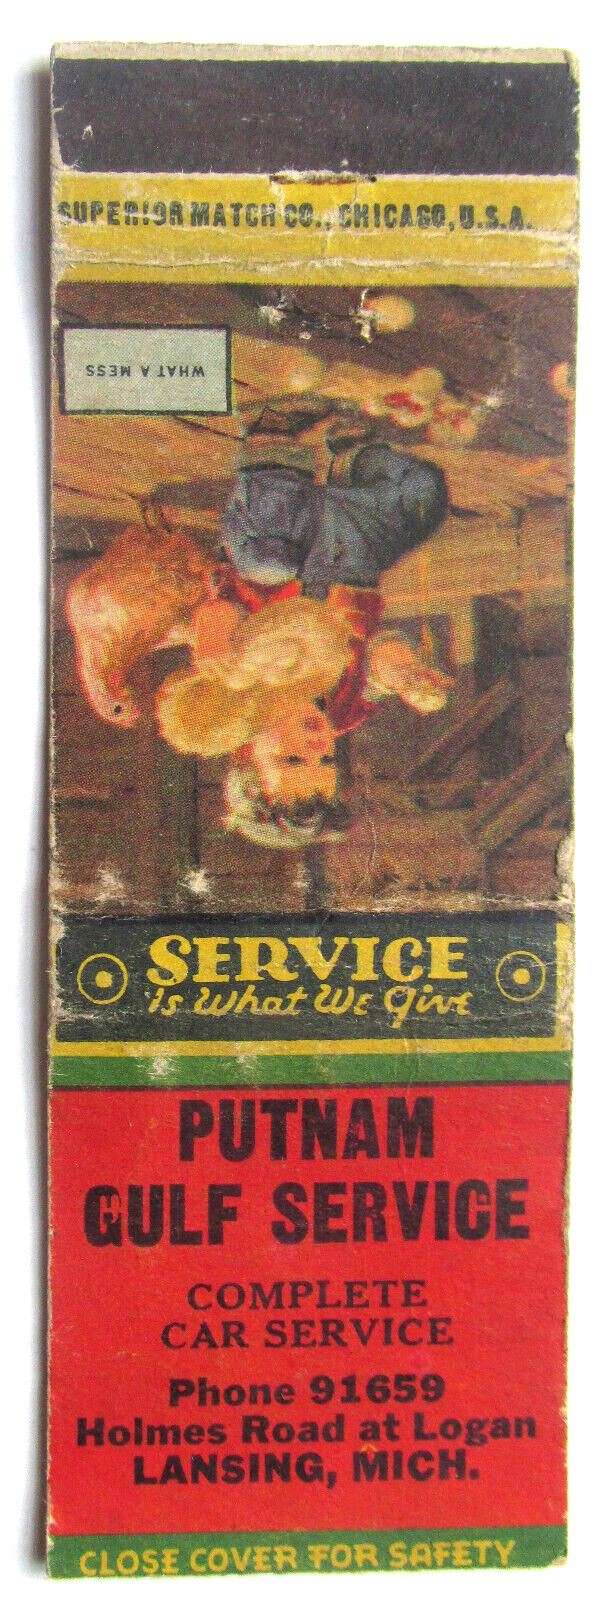 Primary image for Putnam Gulf Service - Lansing, Michigan 20 Strike Matchbook Cover "What a Mess"